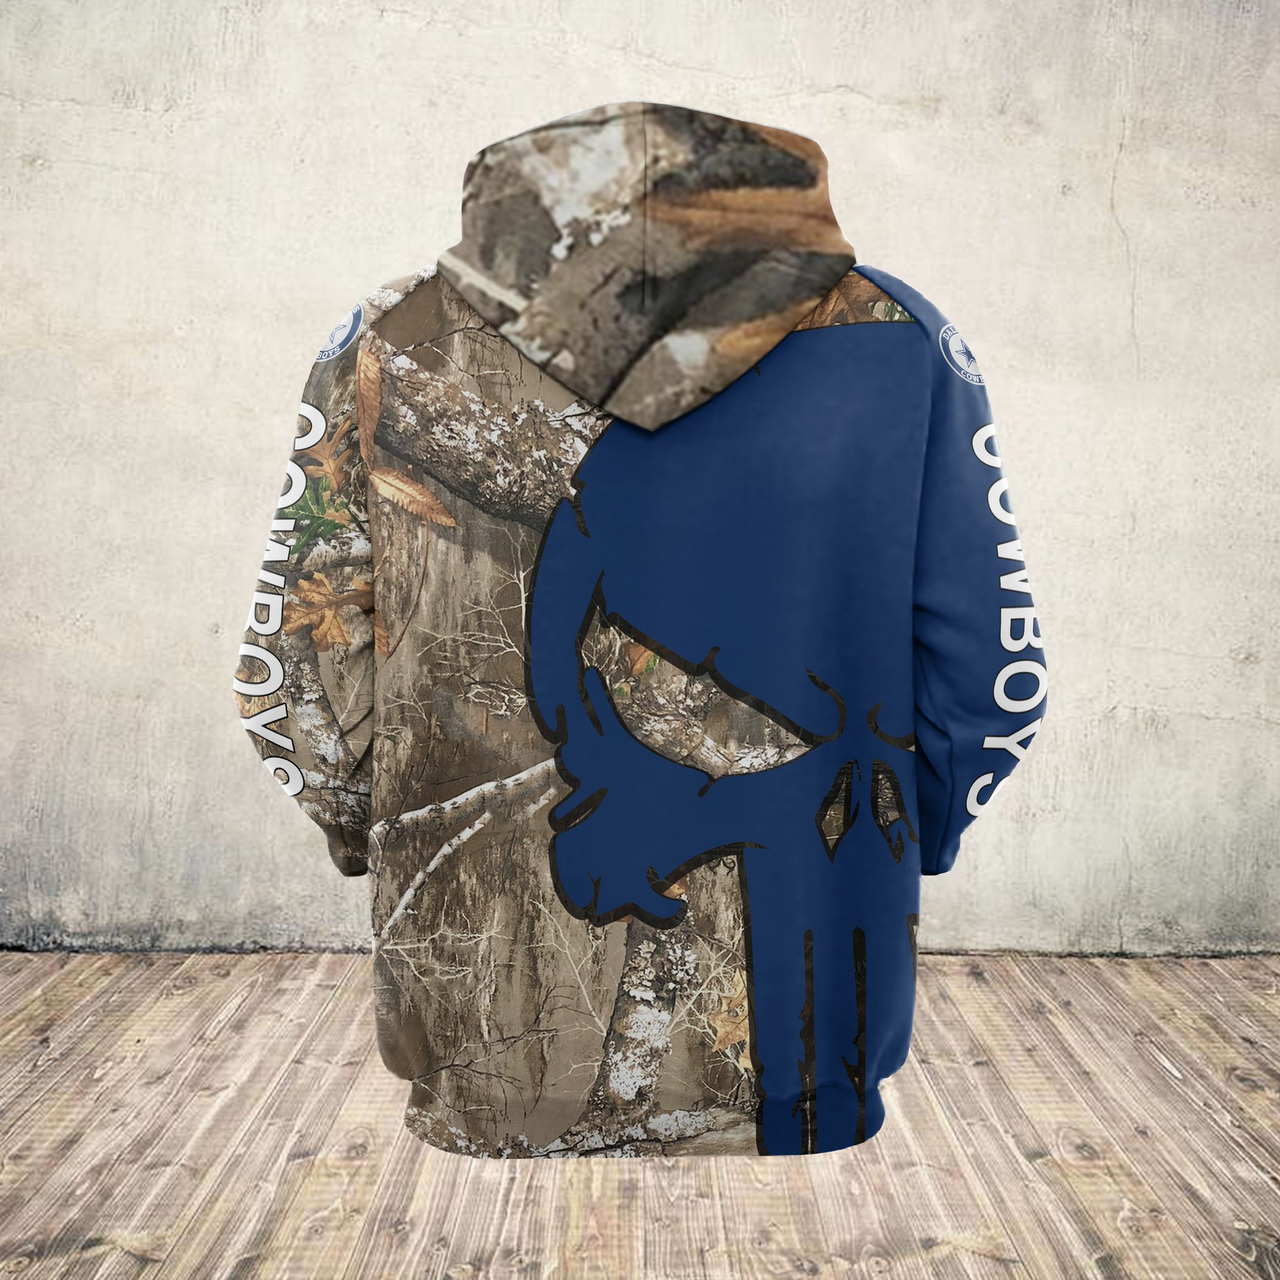  **(OFFICIAL-N.F.L.DALLAS-COWBOYS-ZIPPERED-HOODIES/NICE-DETAILED-3D-CUSTOM-GRAPHIC-PRINTED-REAL-TREE-CAMO. PUNISHER-SKULL-DESIGN/FEATURING-OFFICIAL-CUSTOM-COWBOYS-LOGOS & OFFICIAL-CLASSIC-COWBOYS-COLORS/WARM-PREMIUM-COWBOYS-TEAM-ZIPPERED-HOODIES)** 